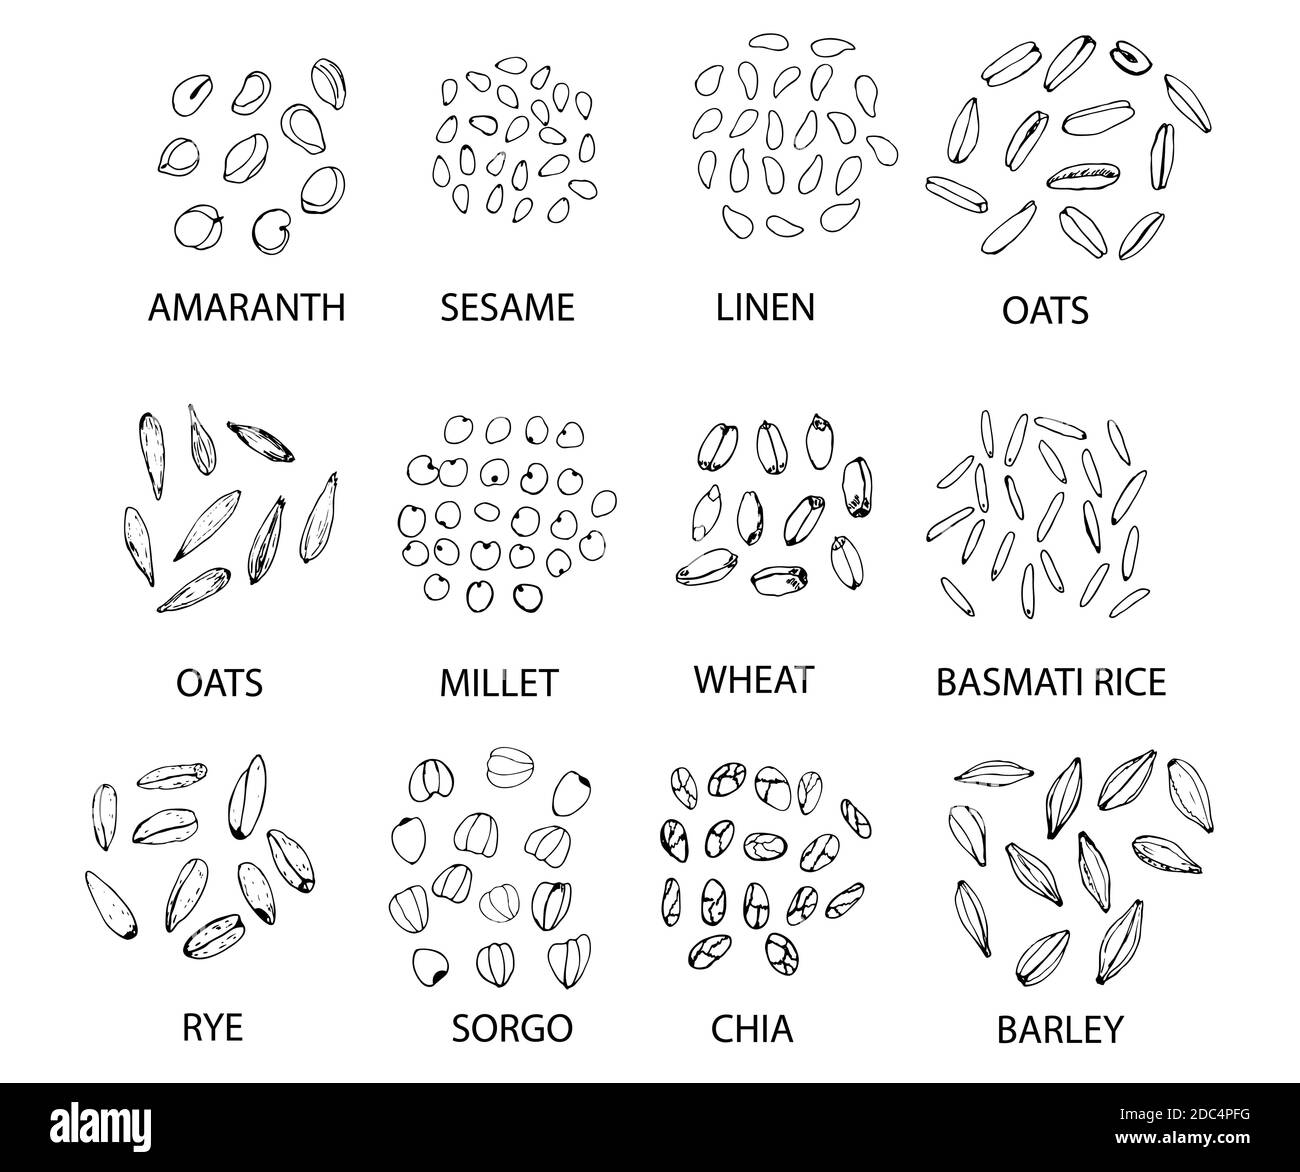 Set of hand drawn outline cereal grains isolated on white. Amaranth, sesame, linen, oats, millet, wheat, rye, sorgo, chia, barley, rice. Stylized vect Stock Vector